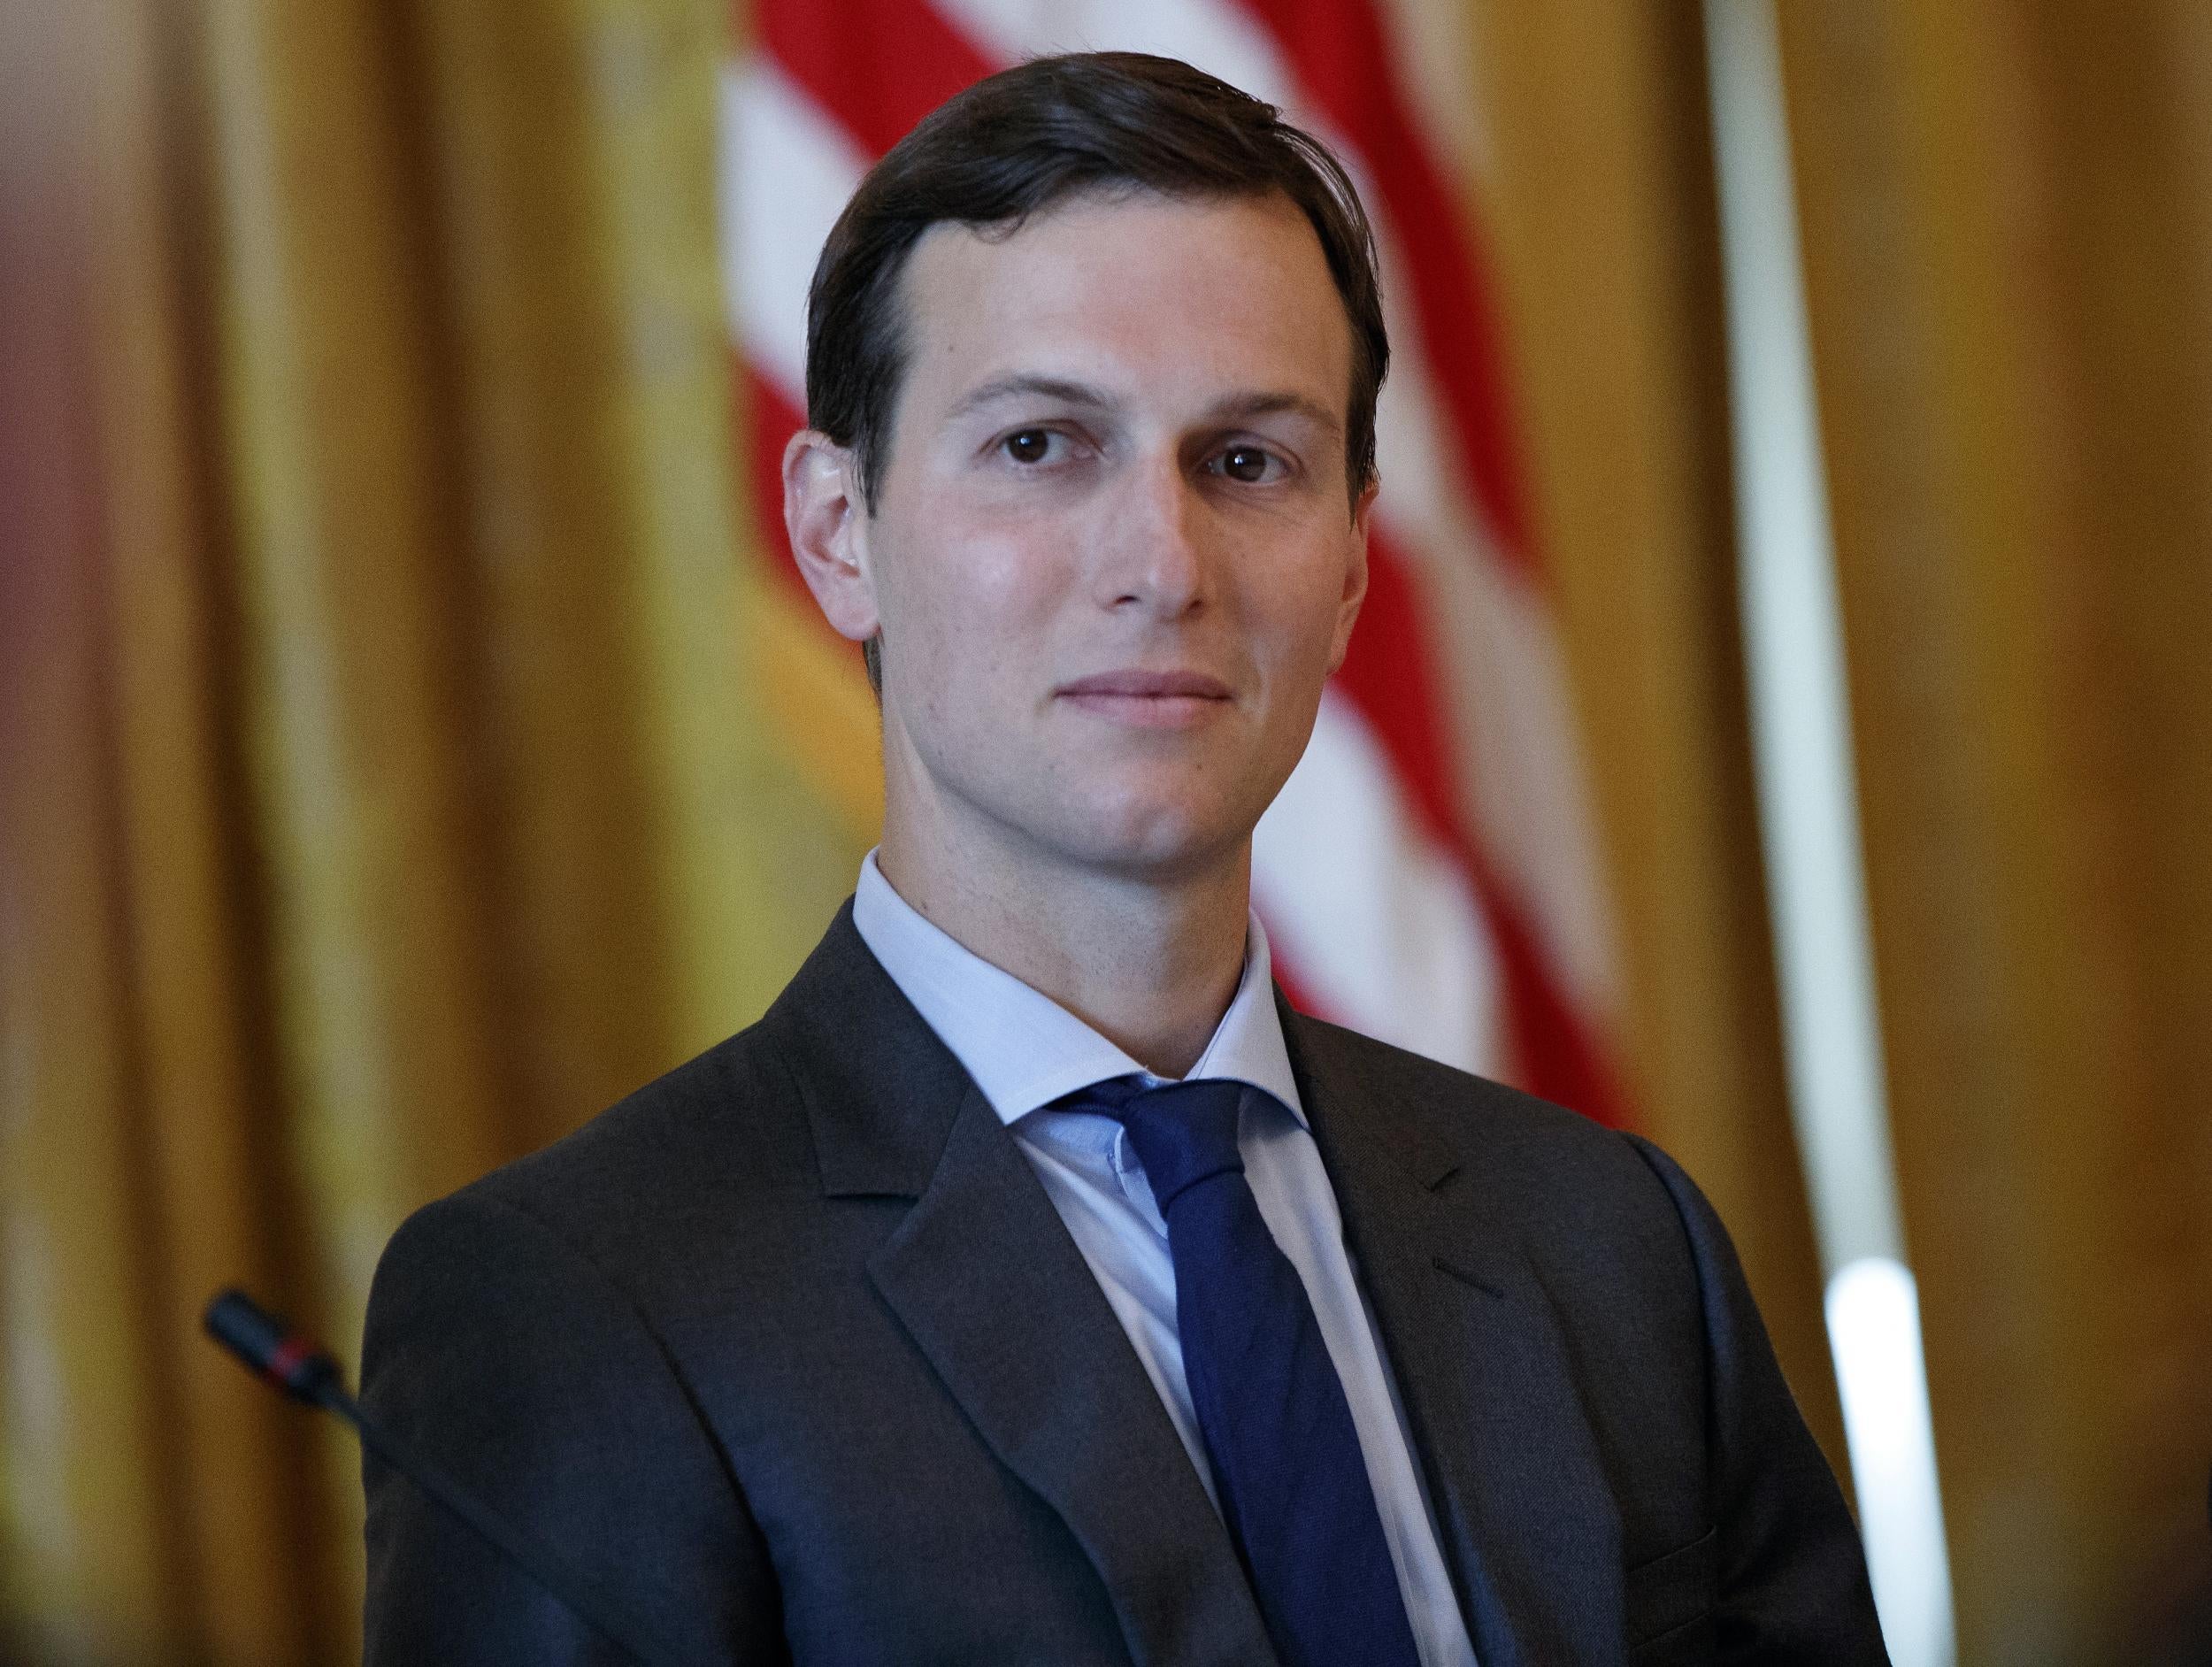 'I did not collude, nor know of anyone else in the campaign who colluded, with any foreign government,' Jared Kushner says in statement